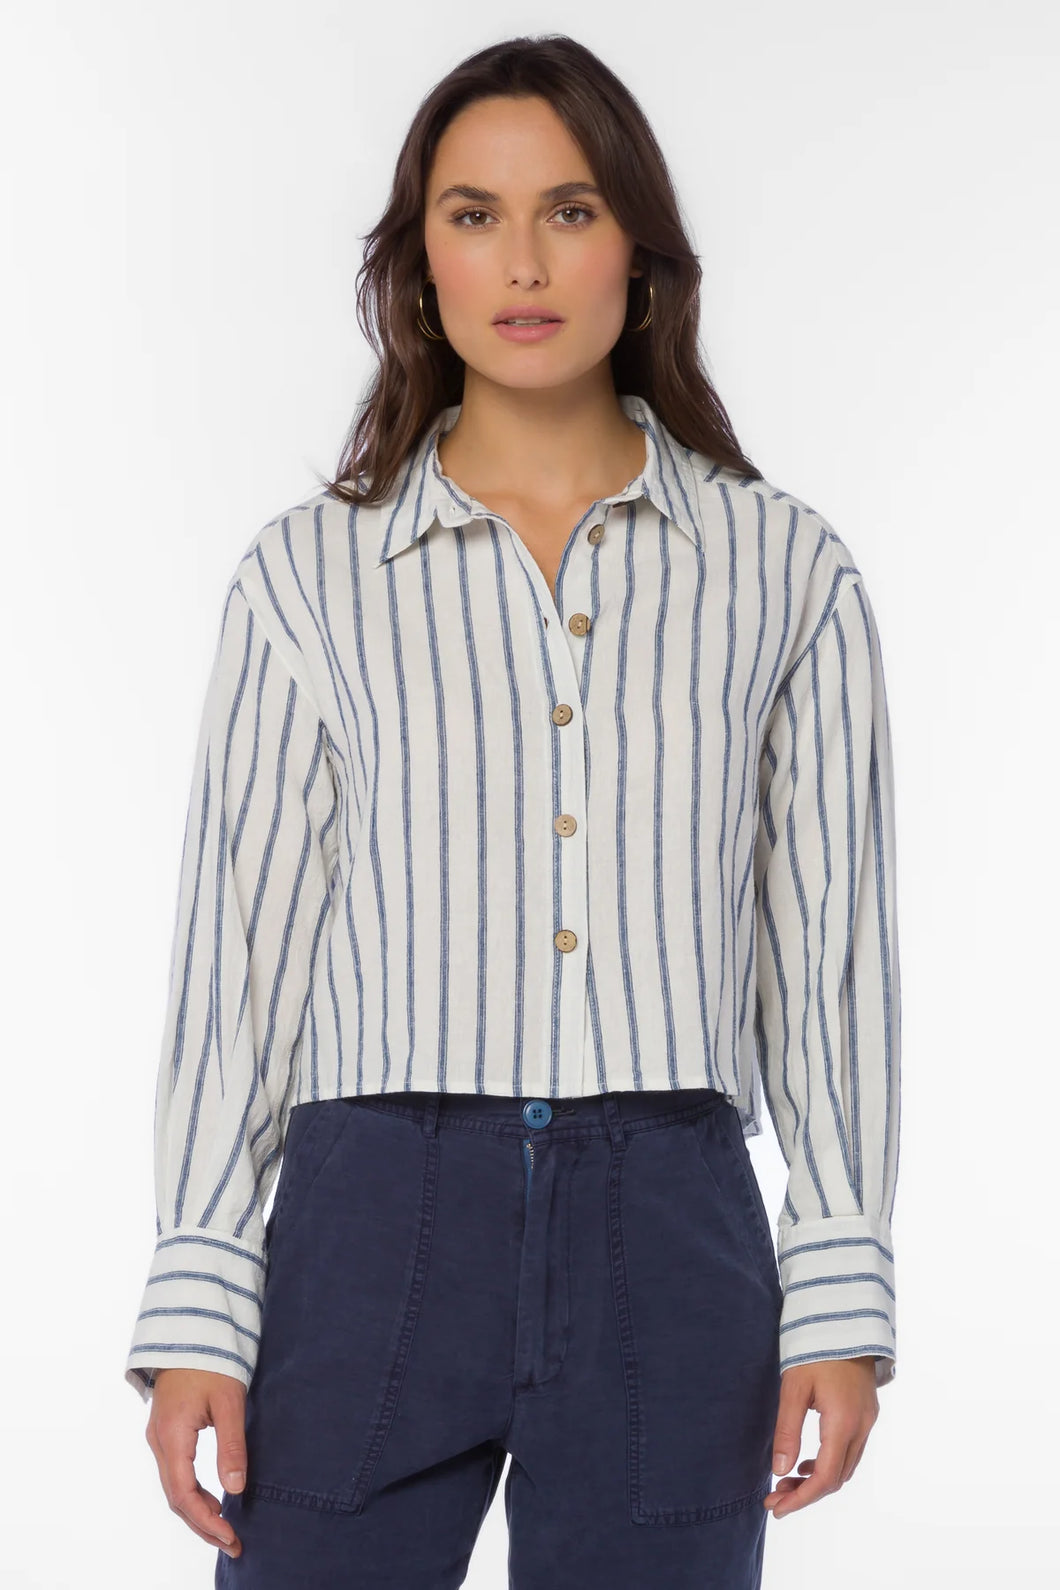 Summerlyn Navy Stripe Cropped Button Up